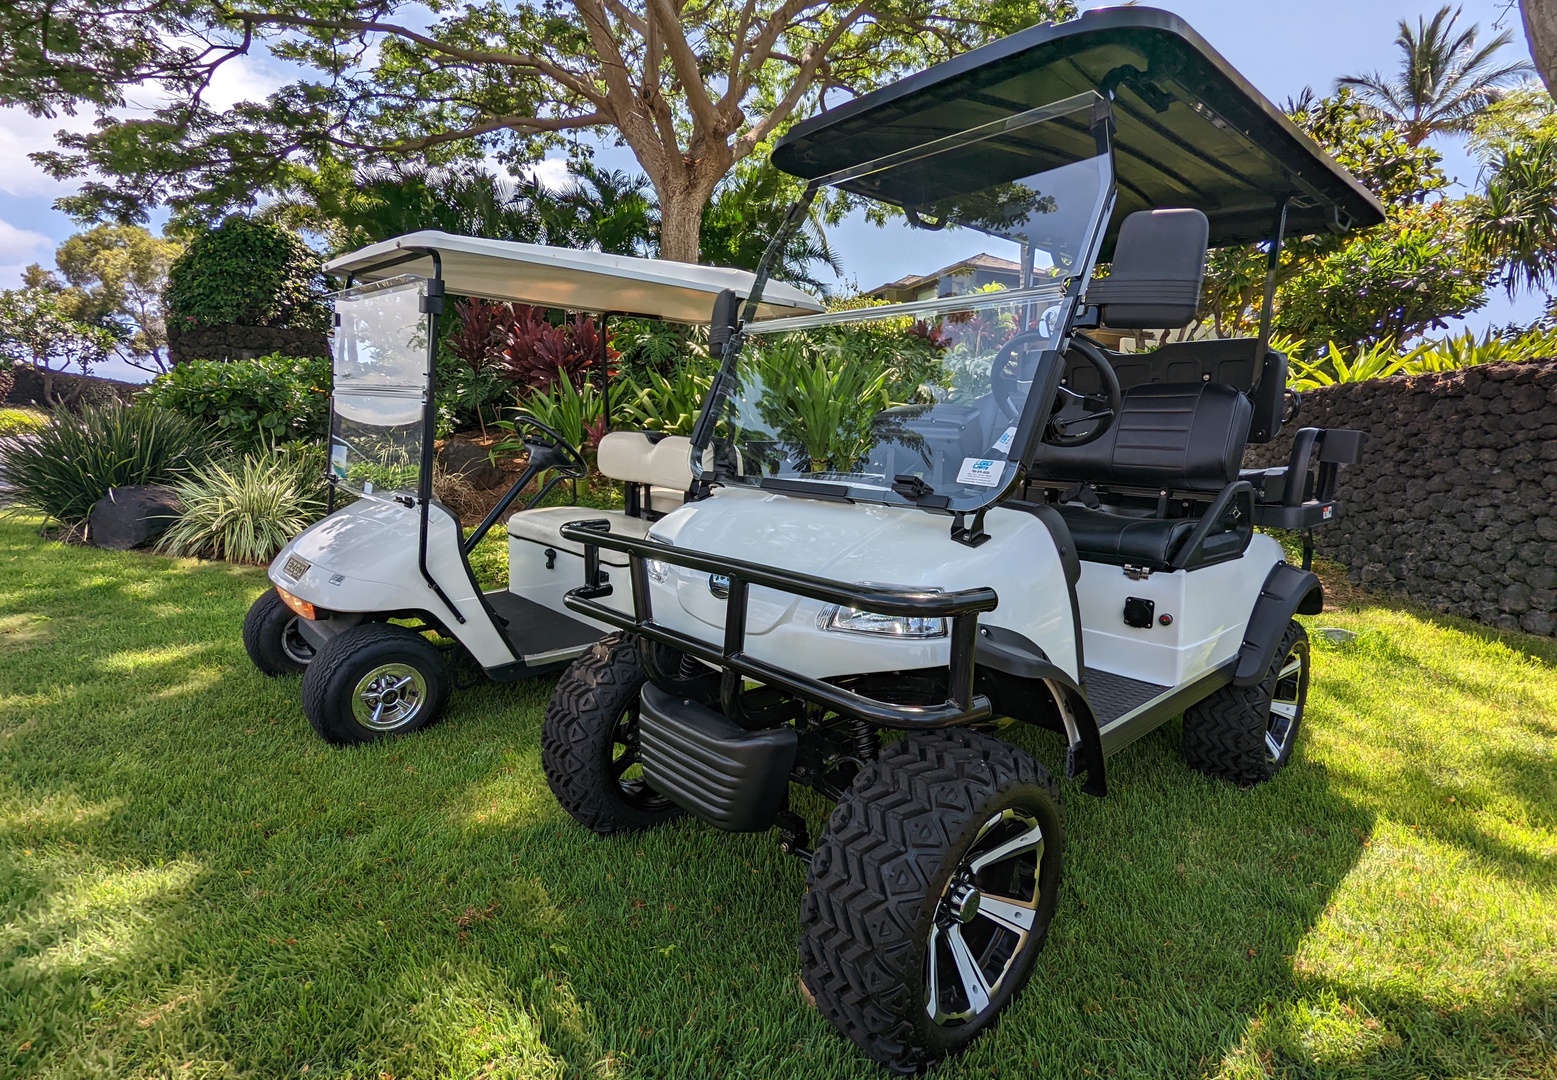 Kailua Kona Vacation Rentals, 3BD Hainoa Villa (2907C) at Four Seasons Resort at Hualalai - Use of two 4-Seater golf carts is included in your rental for cruising the dazzling resort grounds in style.